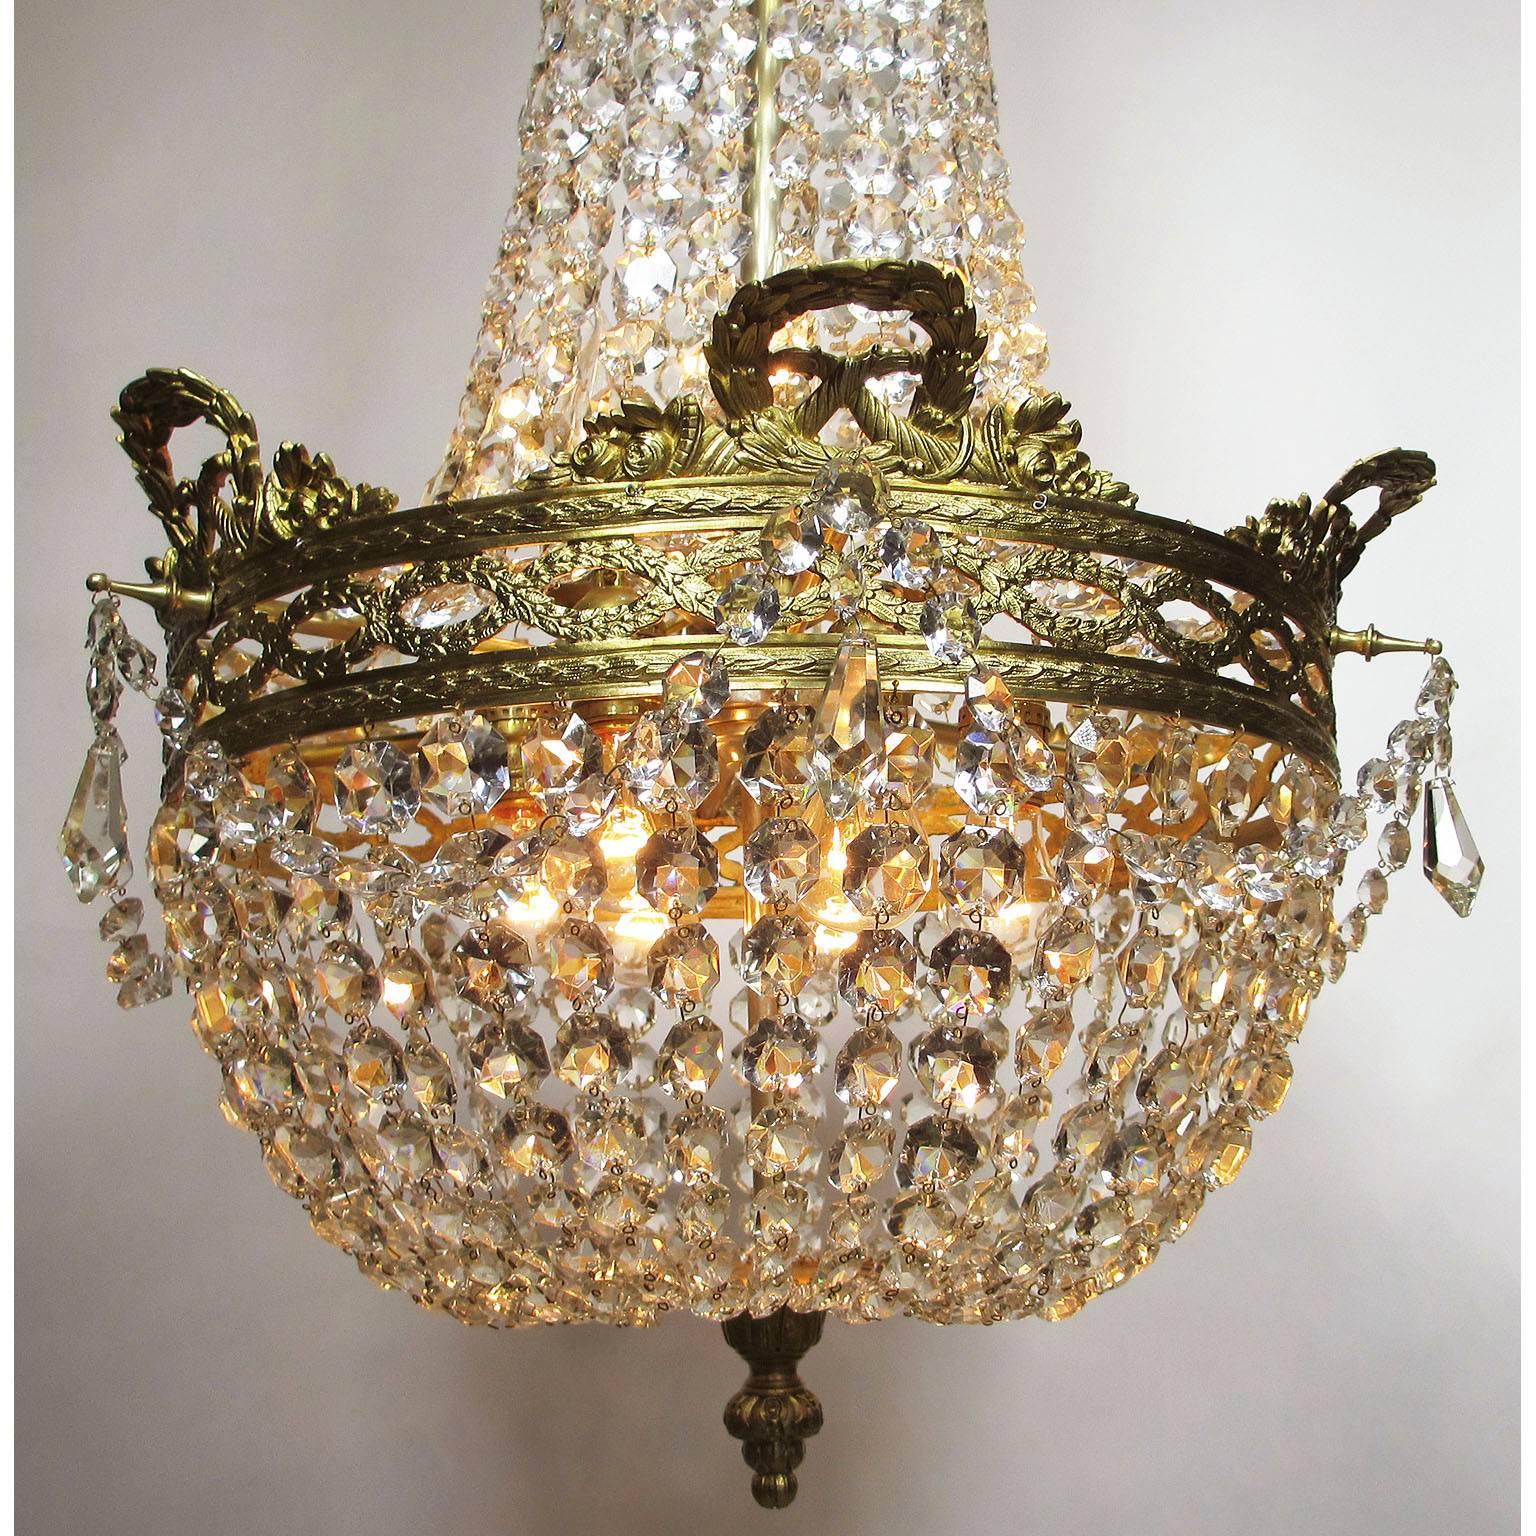 Empire Revival French 19th-20th Century Empire Style Gilt Metal and Cut-Glass Chandelier For Sale